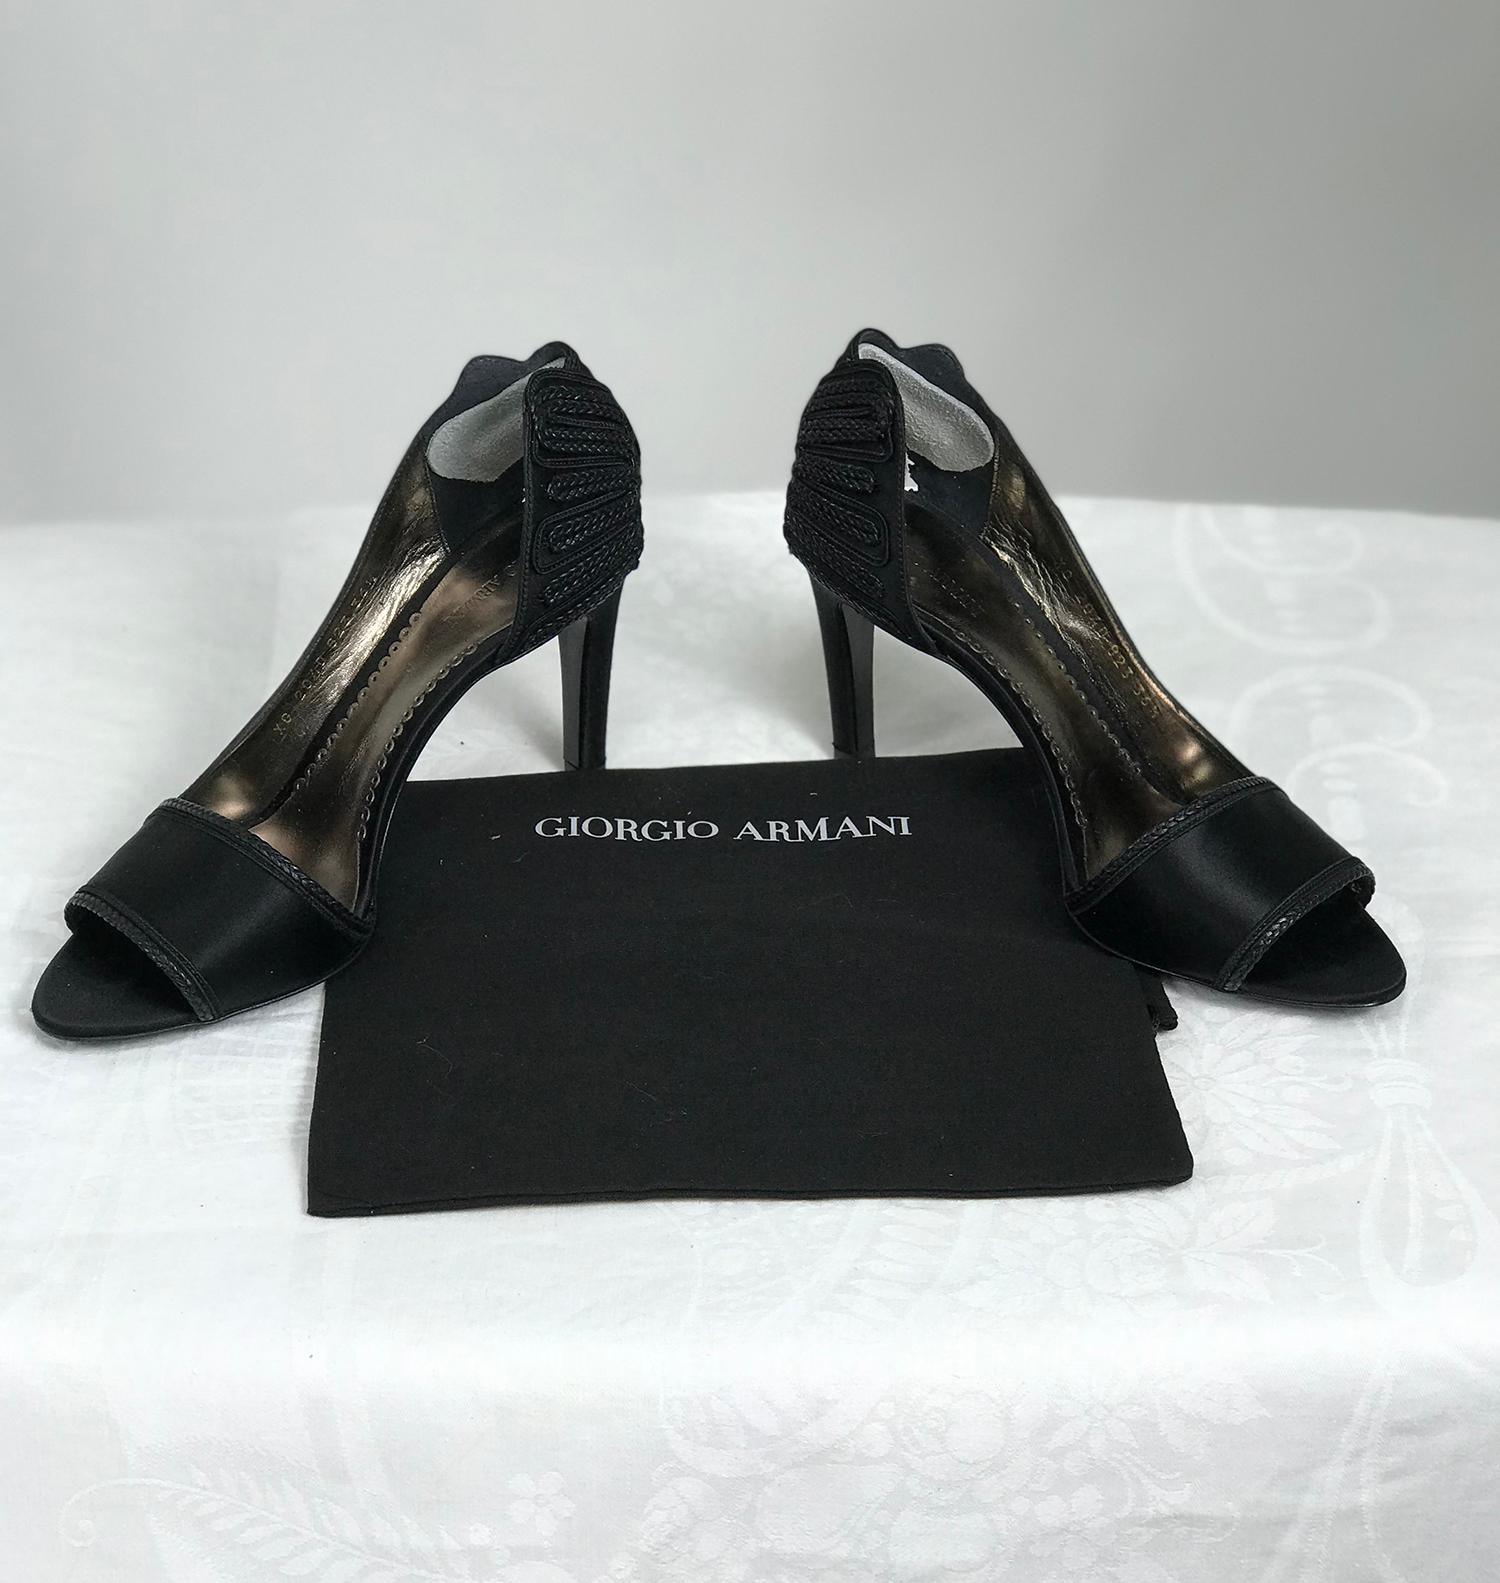 Giorgio Armani Black Satin D'orsay High Heel Pump Passementerie Detail 36 In Good Condition For Sale In West Palm Beach, FL